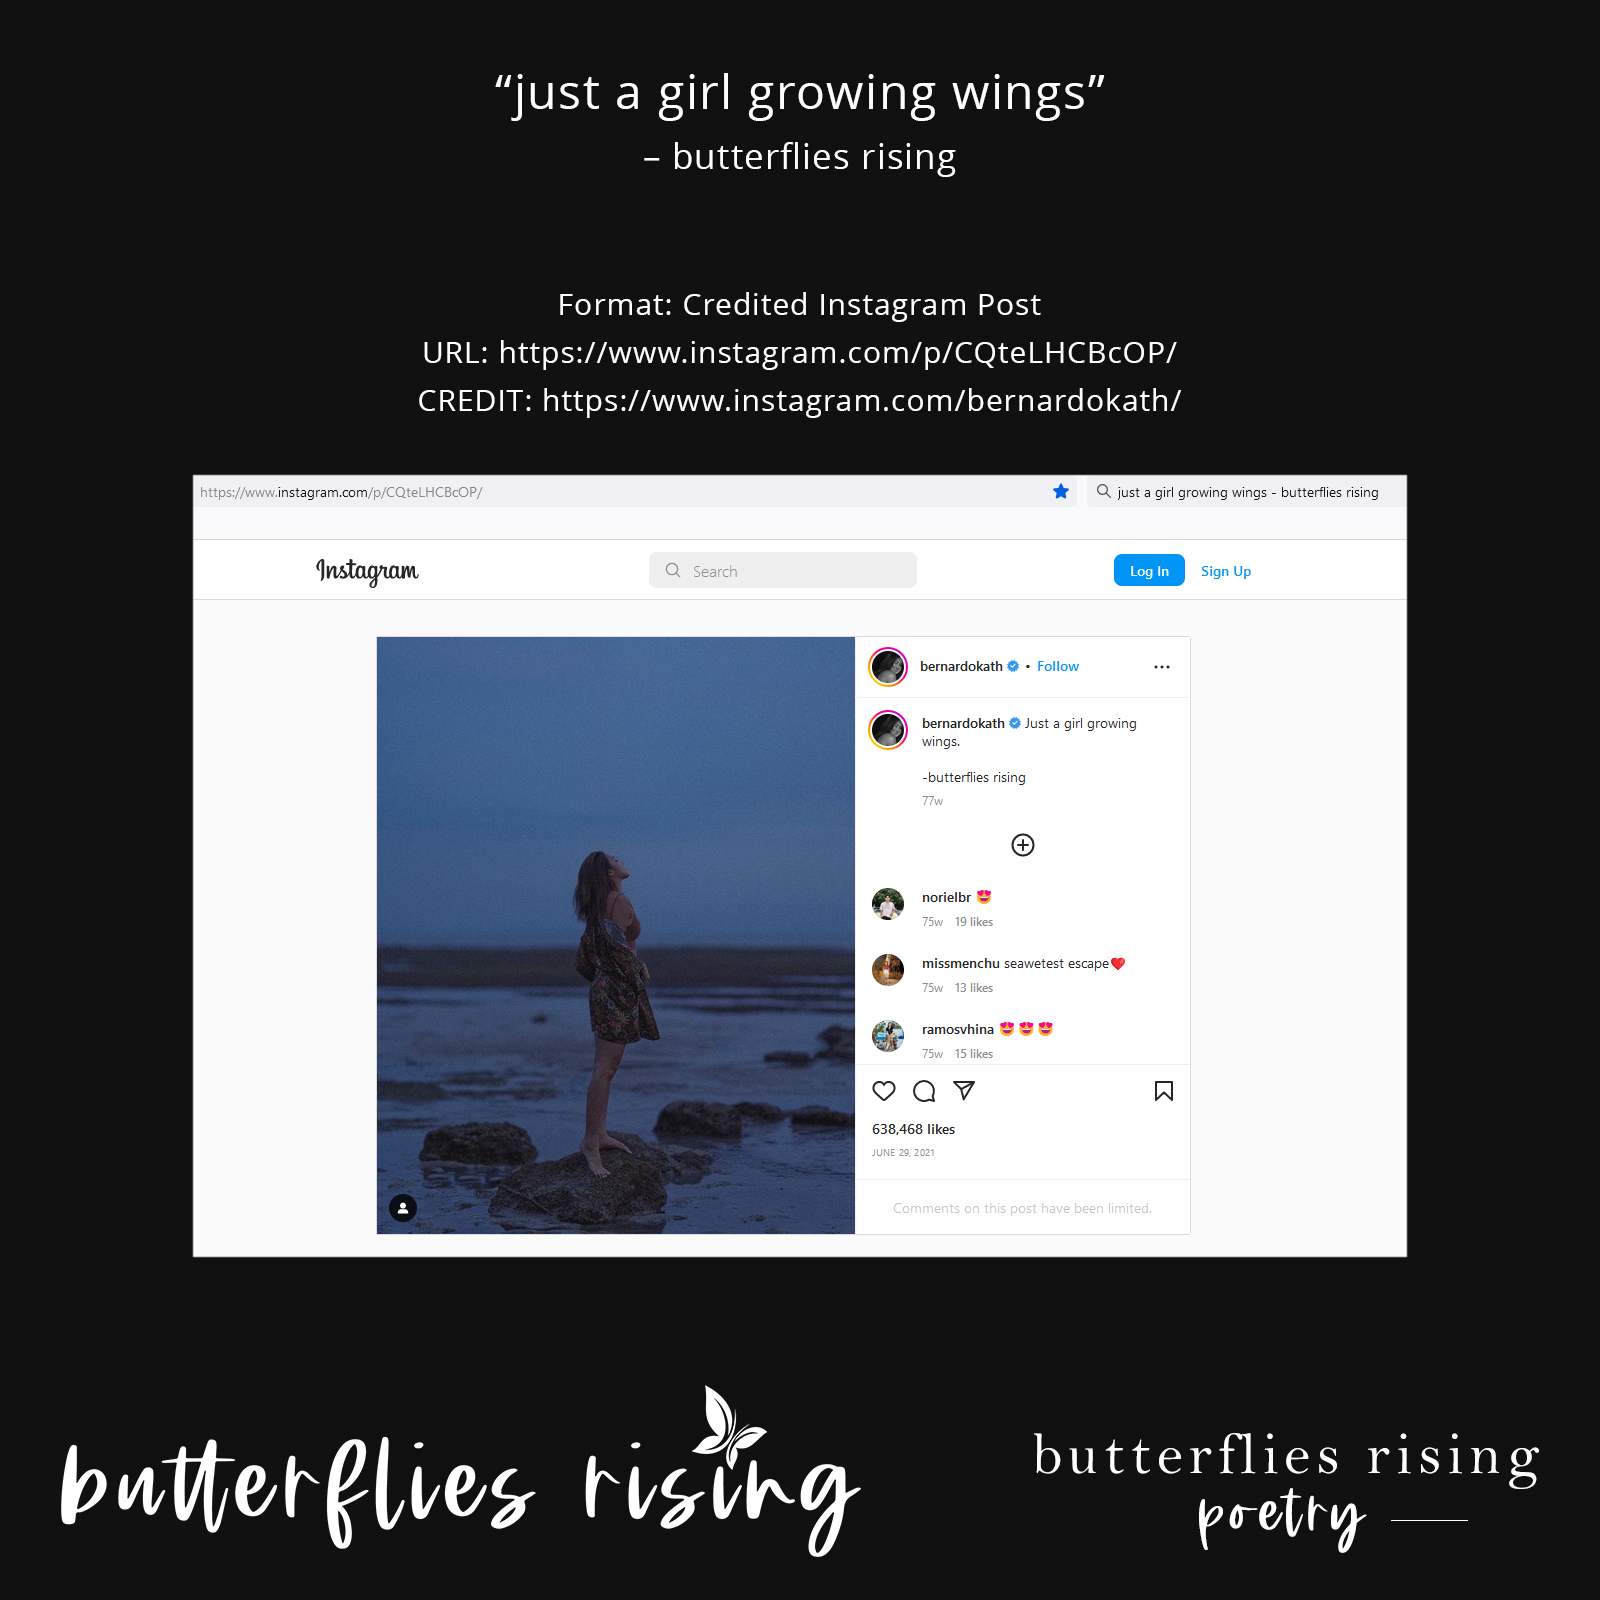 just a girl growing wings - butterflies rising - credited posts